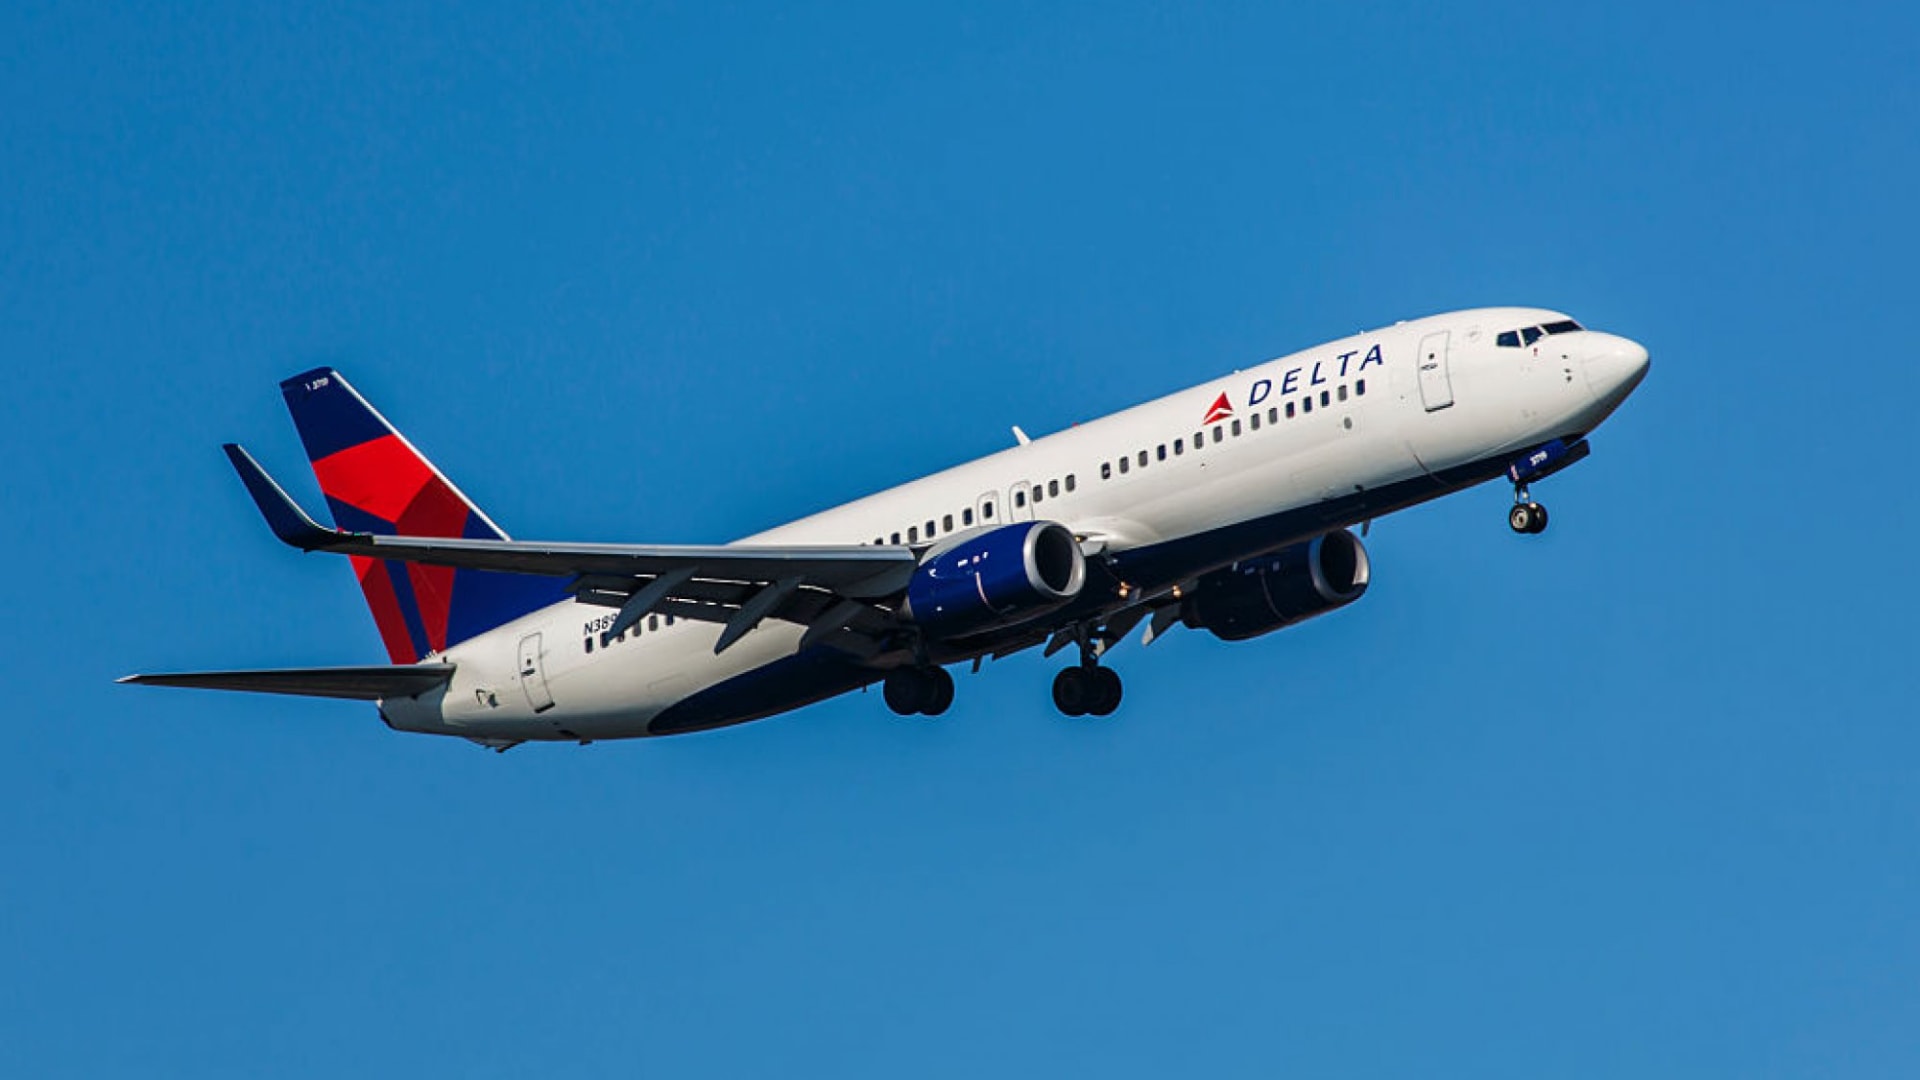 Delta Just Announced a Brilliant Plan to Take a Bite Out of This $100 Billion Industry. It's Straight Out of Apple's Playbook